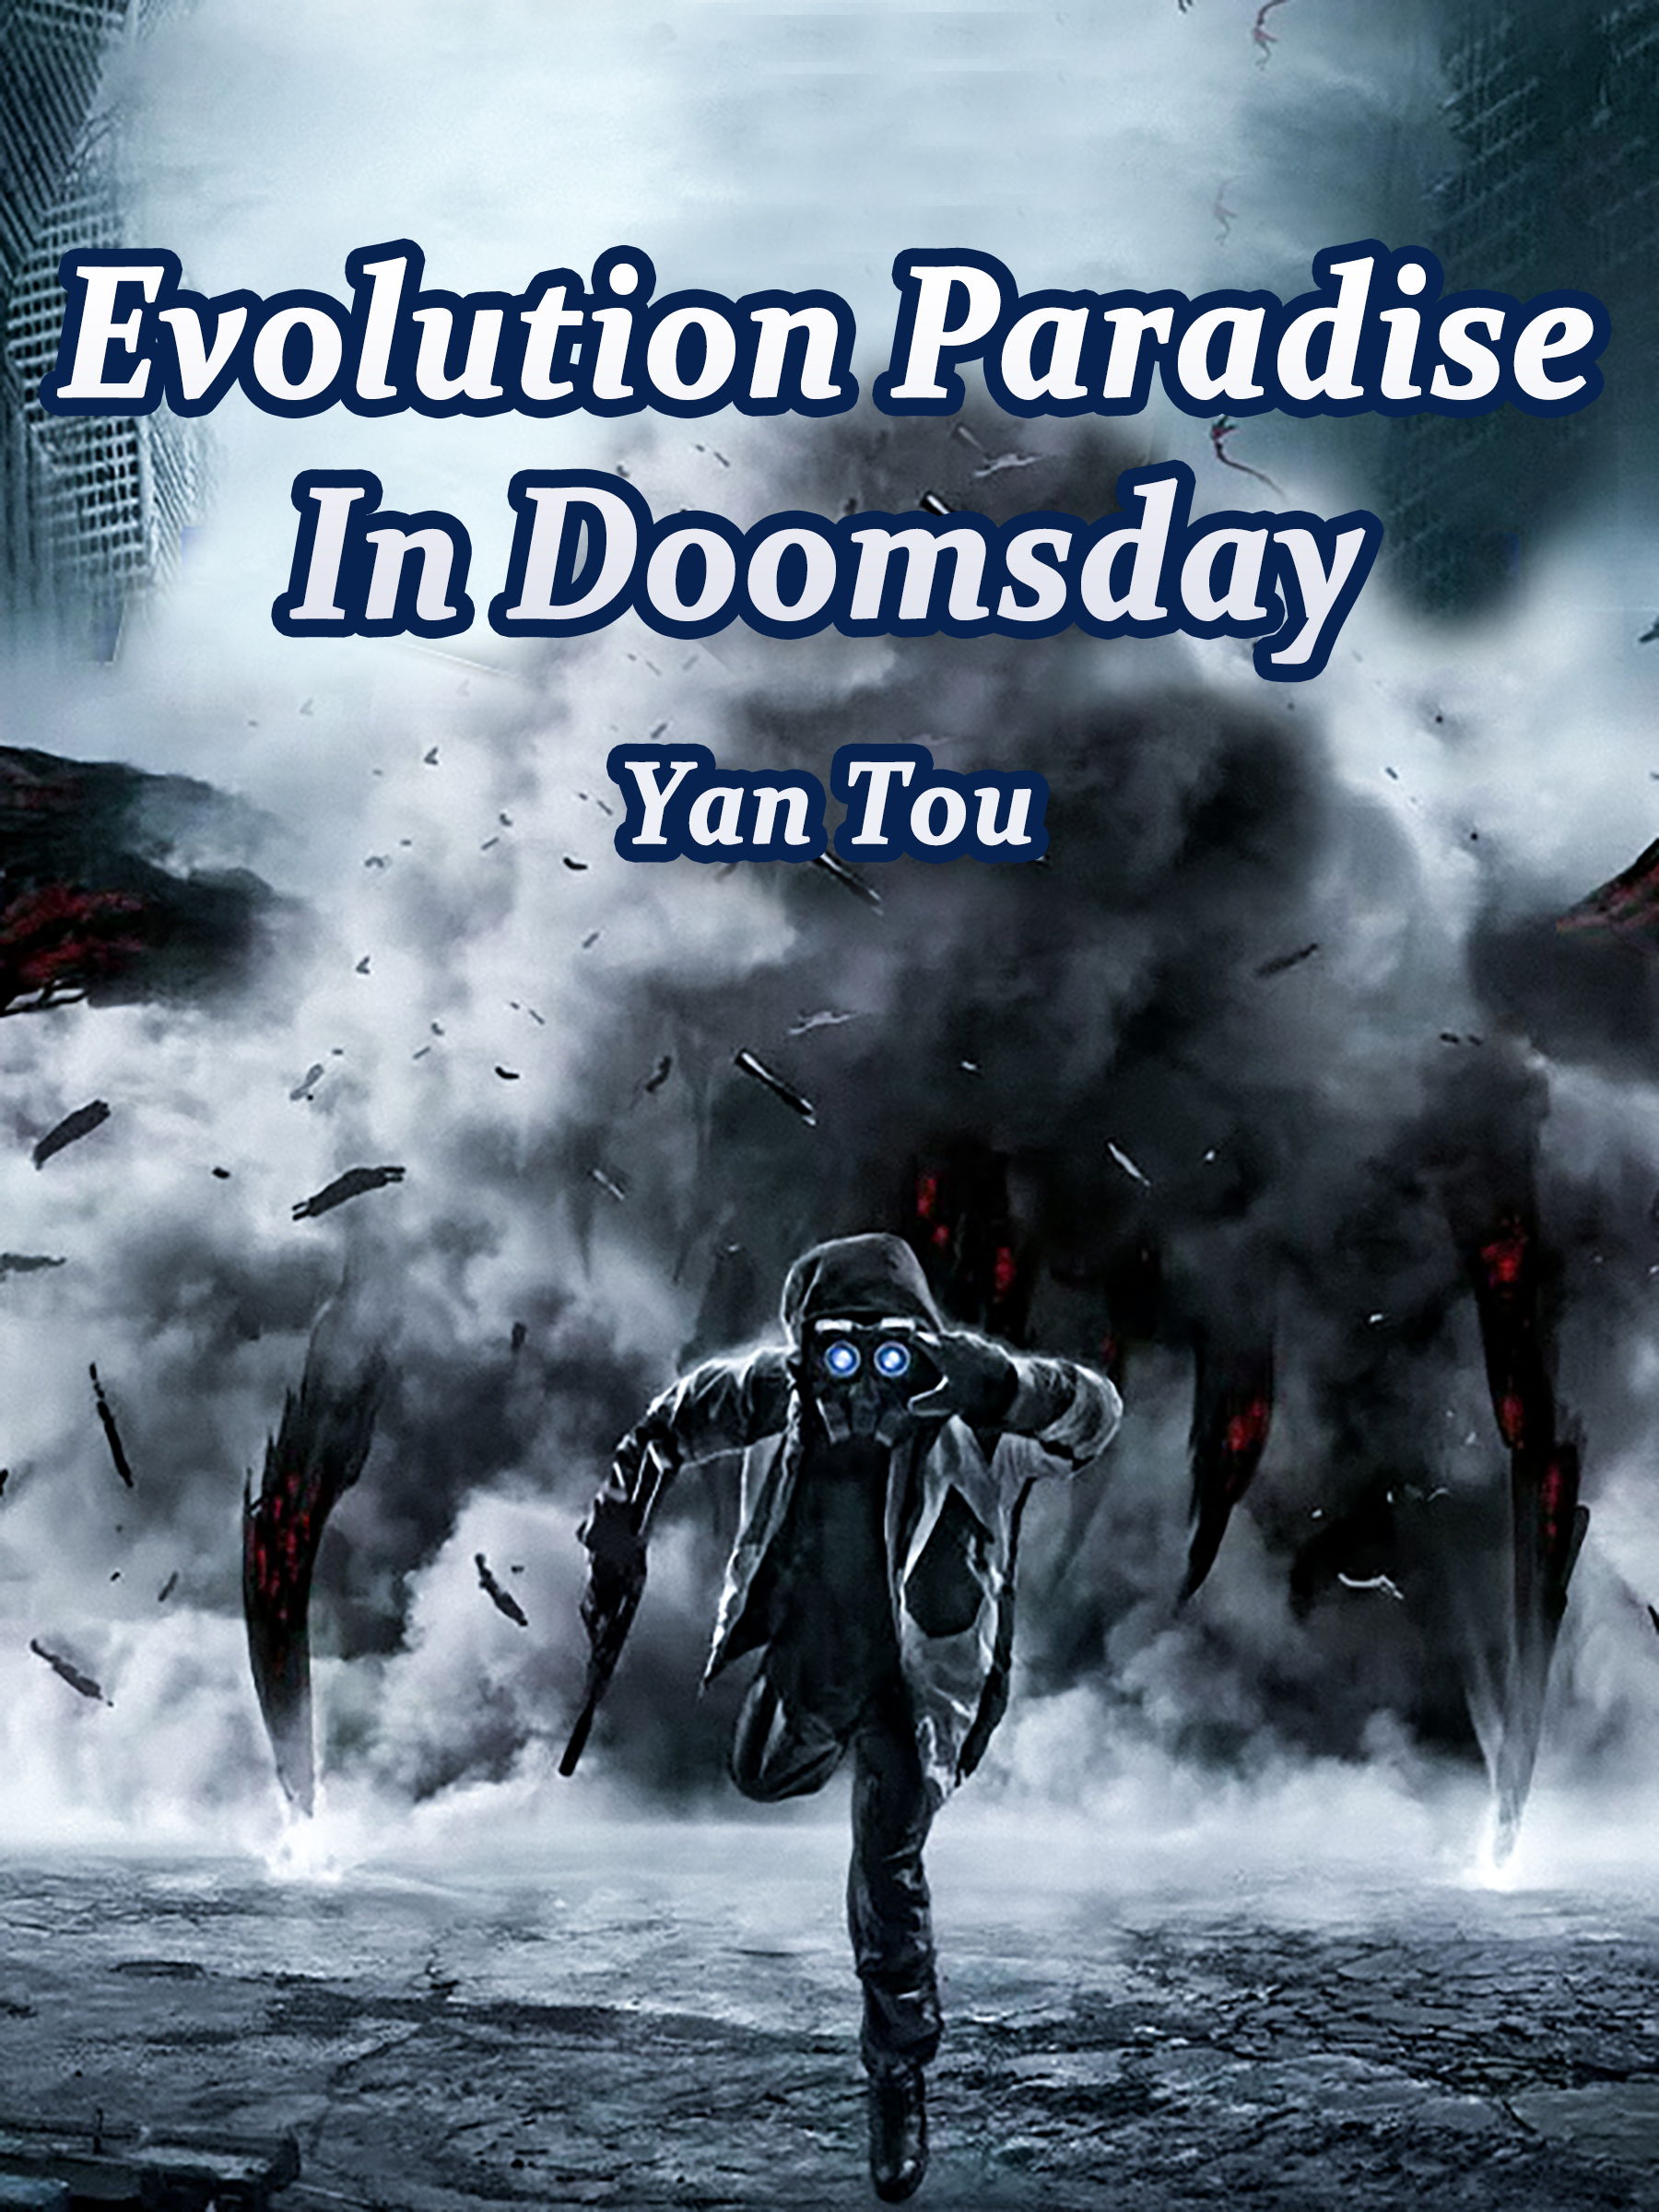 download the new for windows Doomsday Paradise